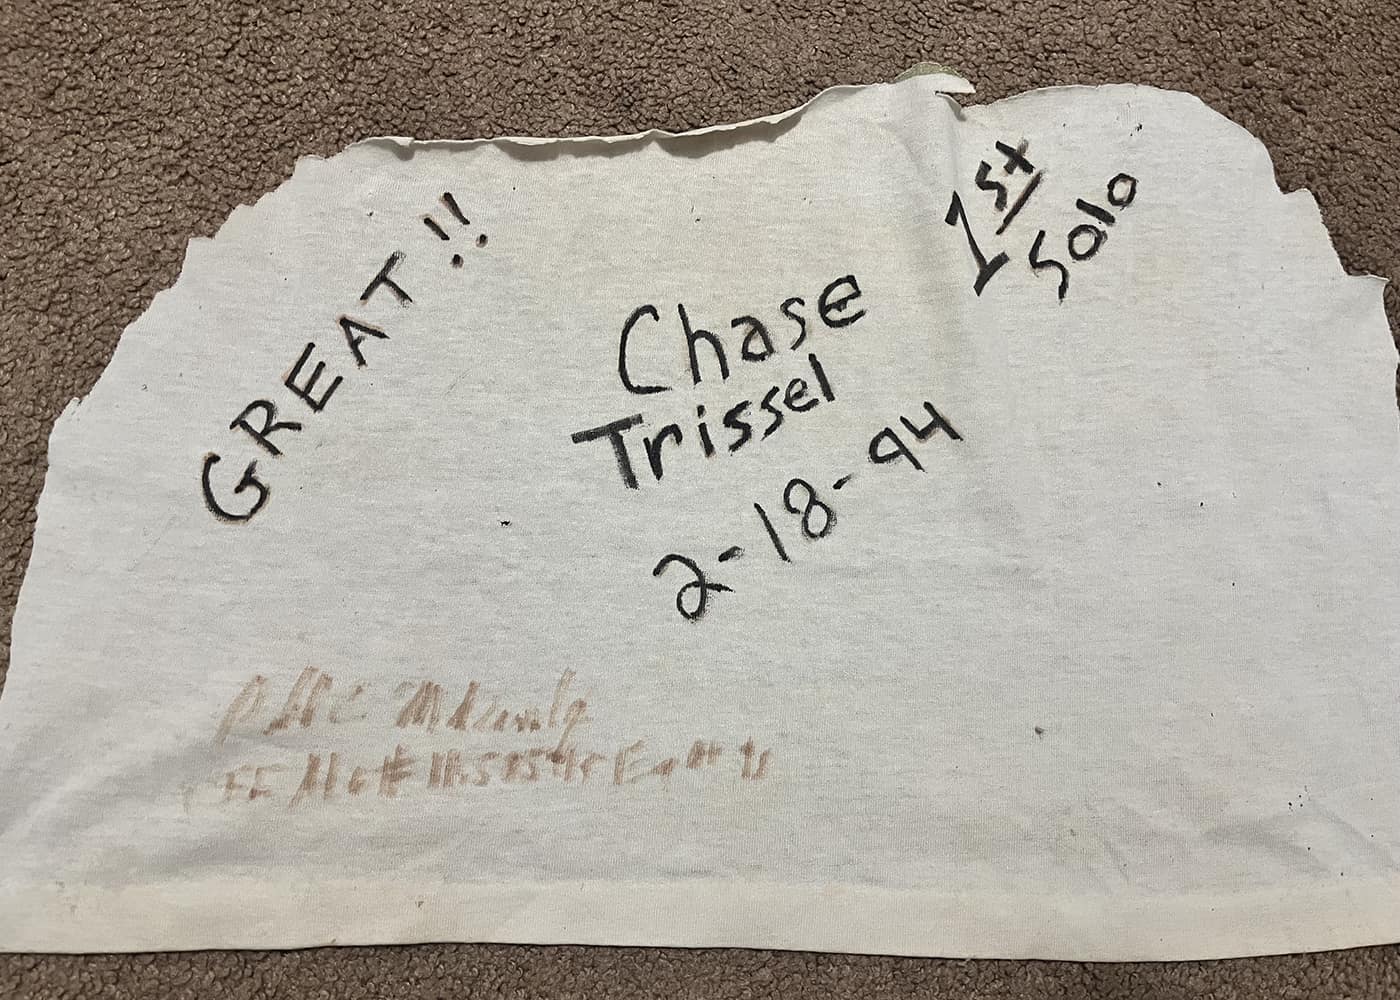 A white piece of cloth with notes written in black marker: Great! Chase Trissel 2-18-94, 1st solo.